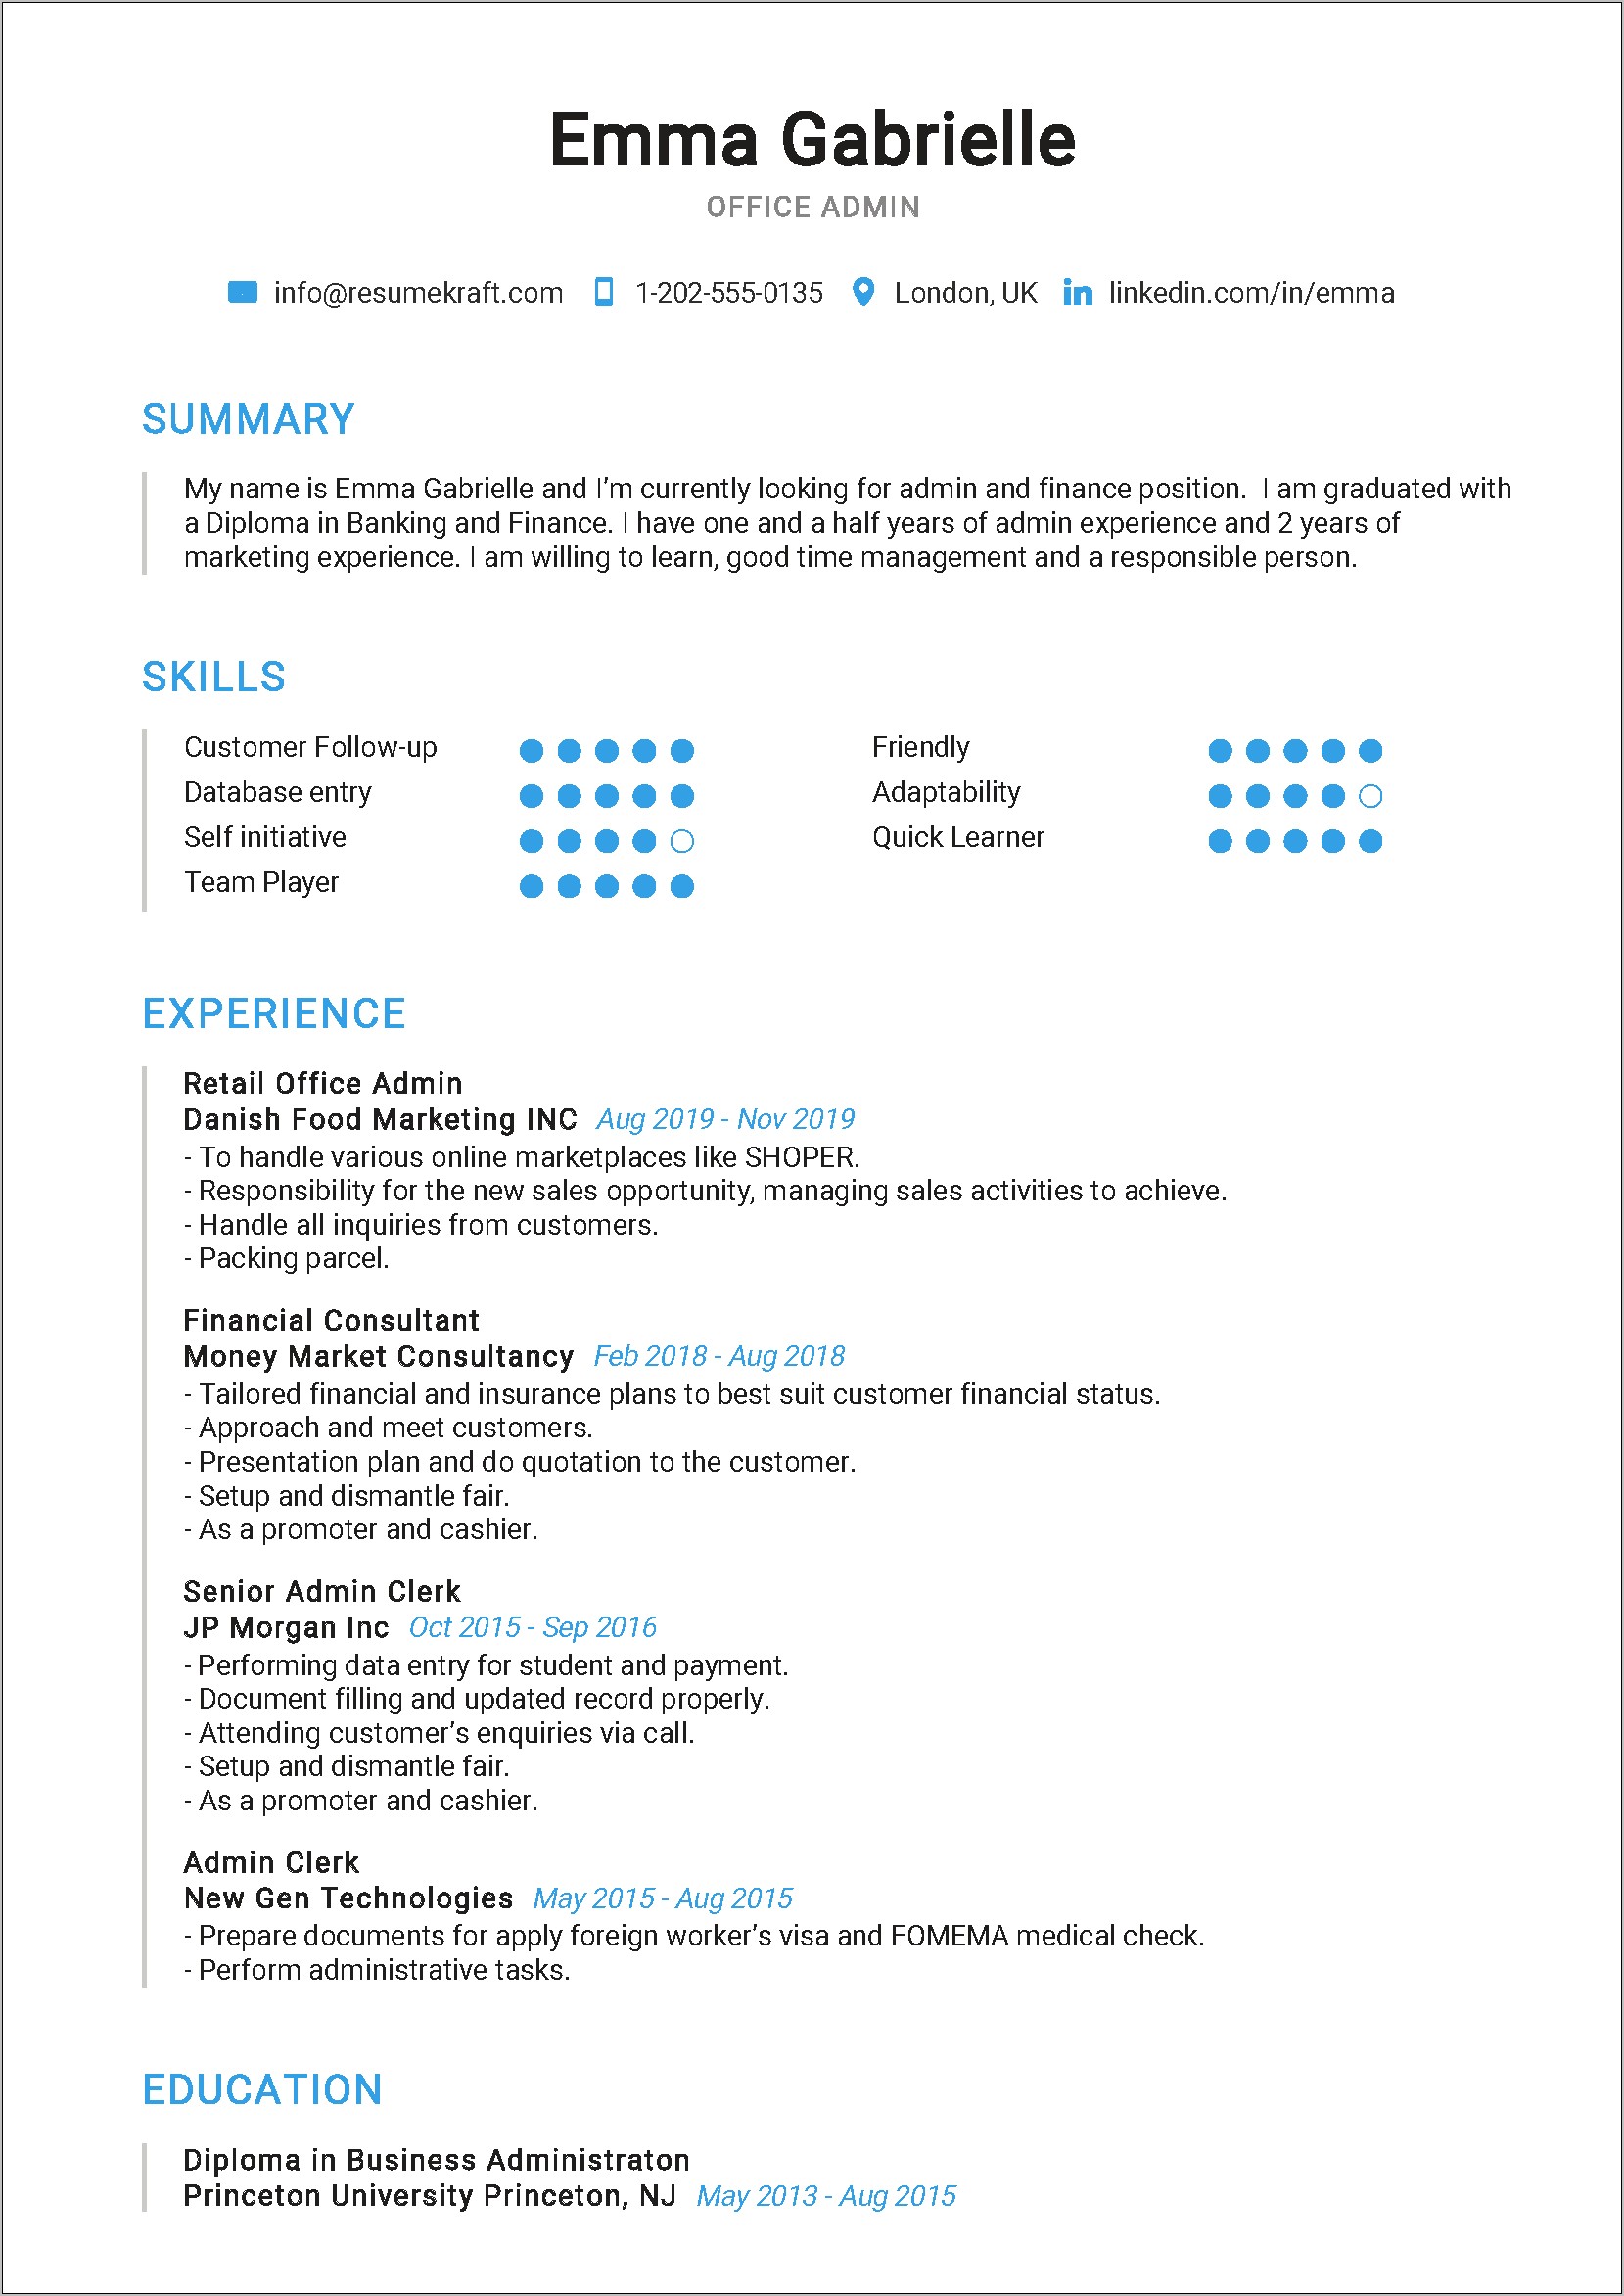 Resume Skill Set For An Office Admin